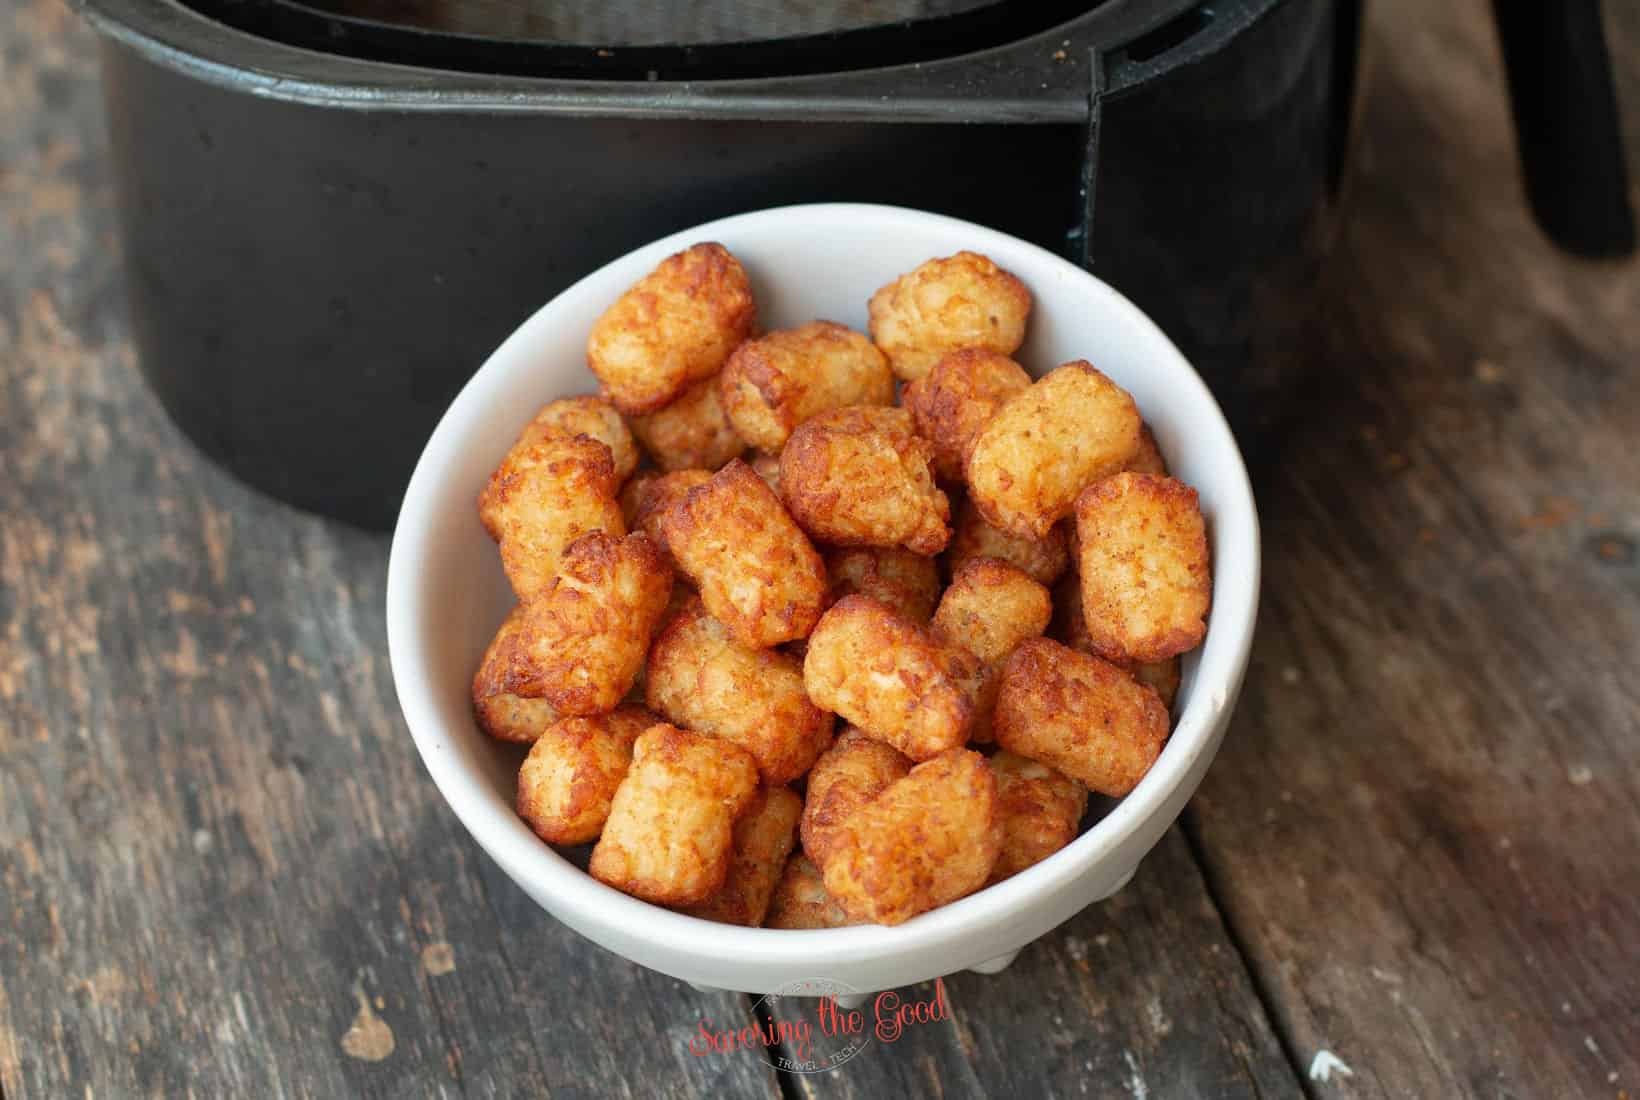 small white bowl of cooked tater tots on a wooden survace, air fryer in the background.